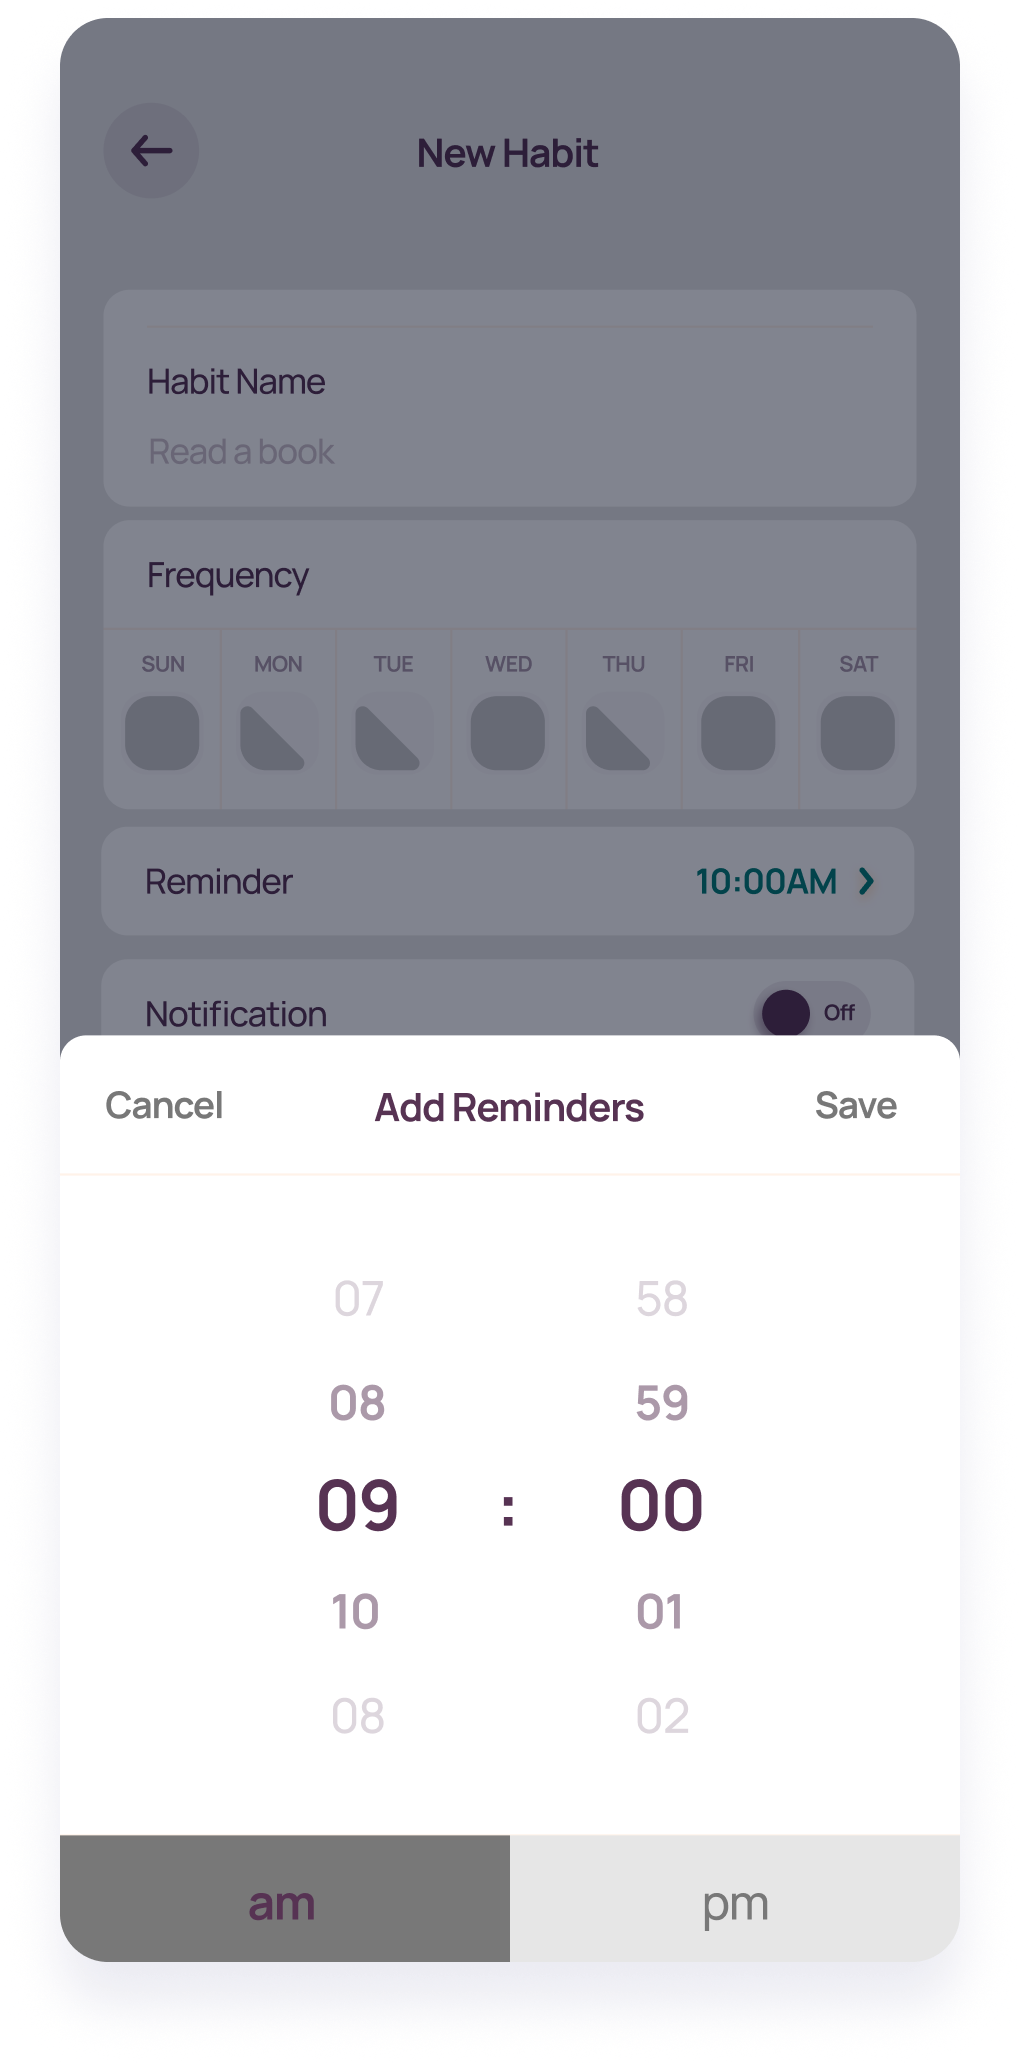  Wireframe of a LifeBalance screen for adding reminders for a habit